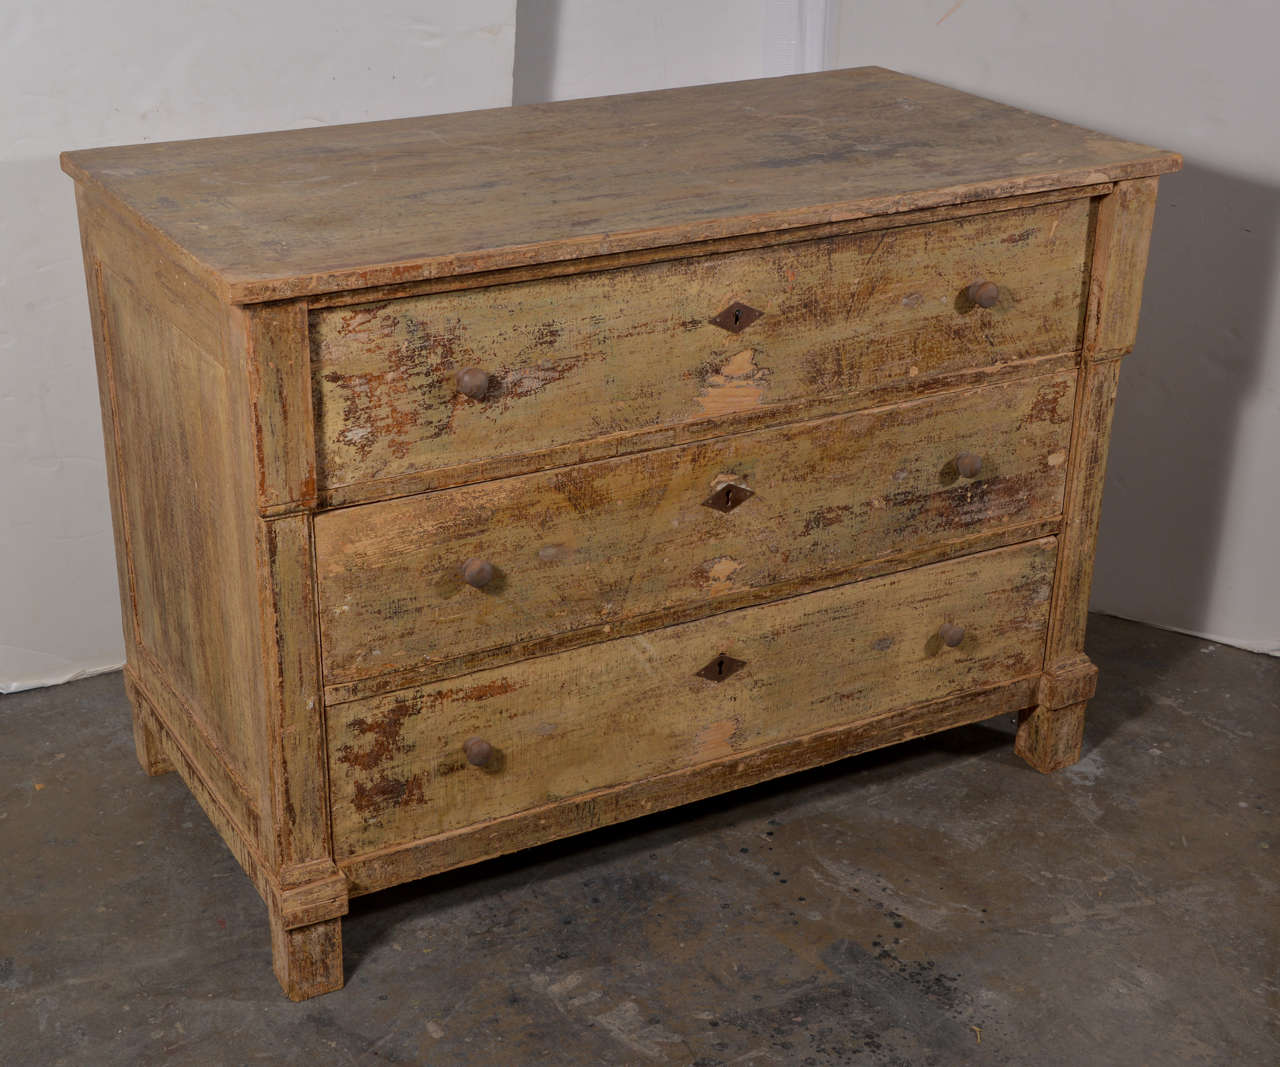 This is a cute French 19th century wood painted commode with a great modern feel to it.
